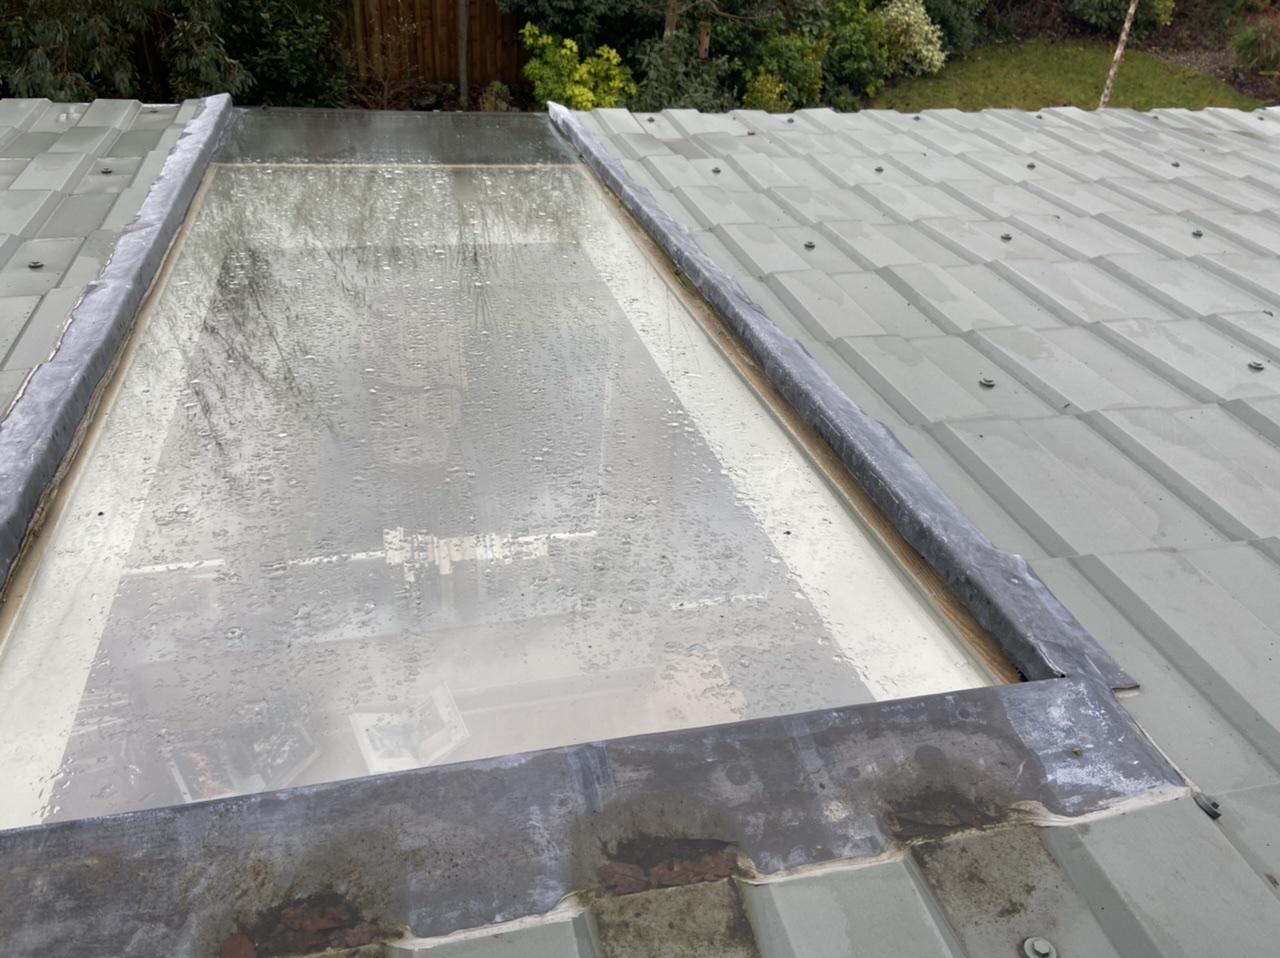 Advice On Sealing Roof Window, How To Seal Around A Velux Window